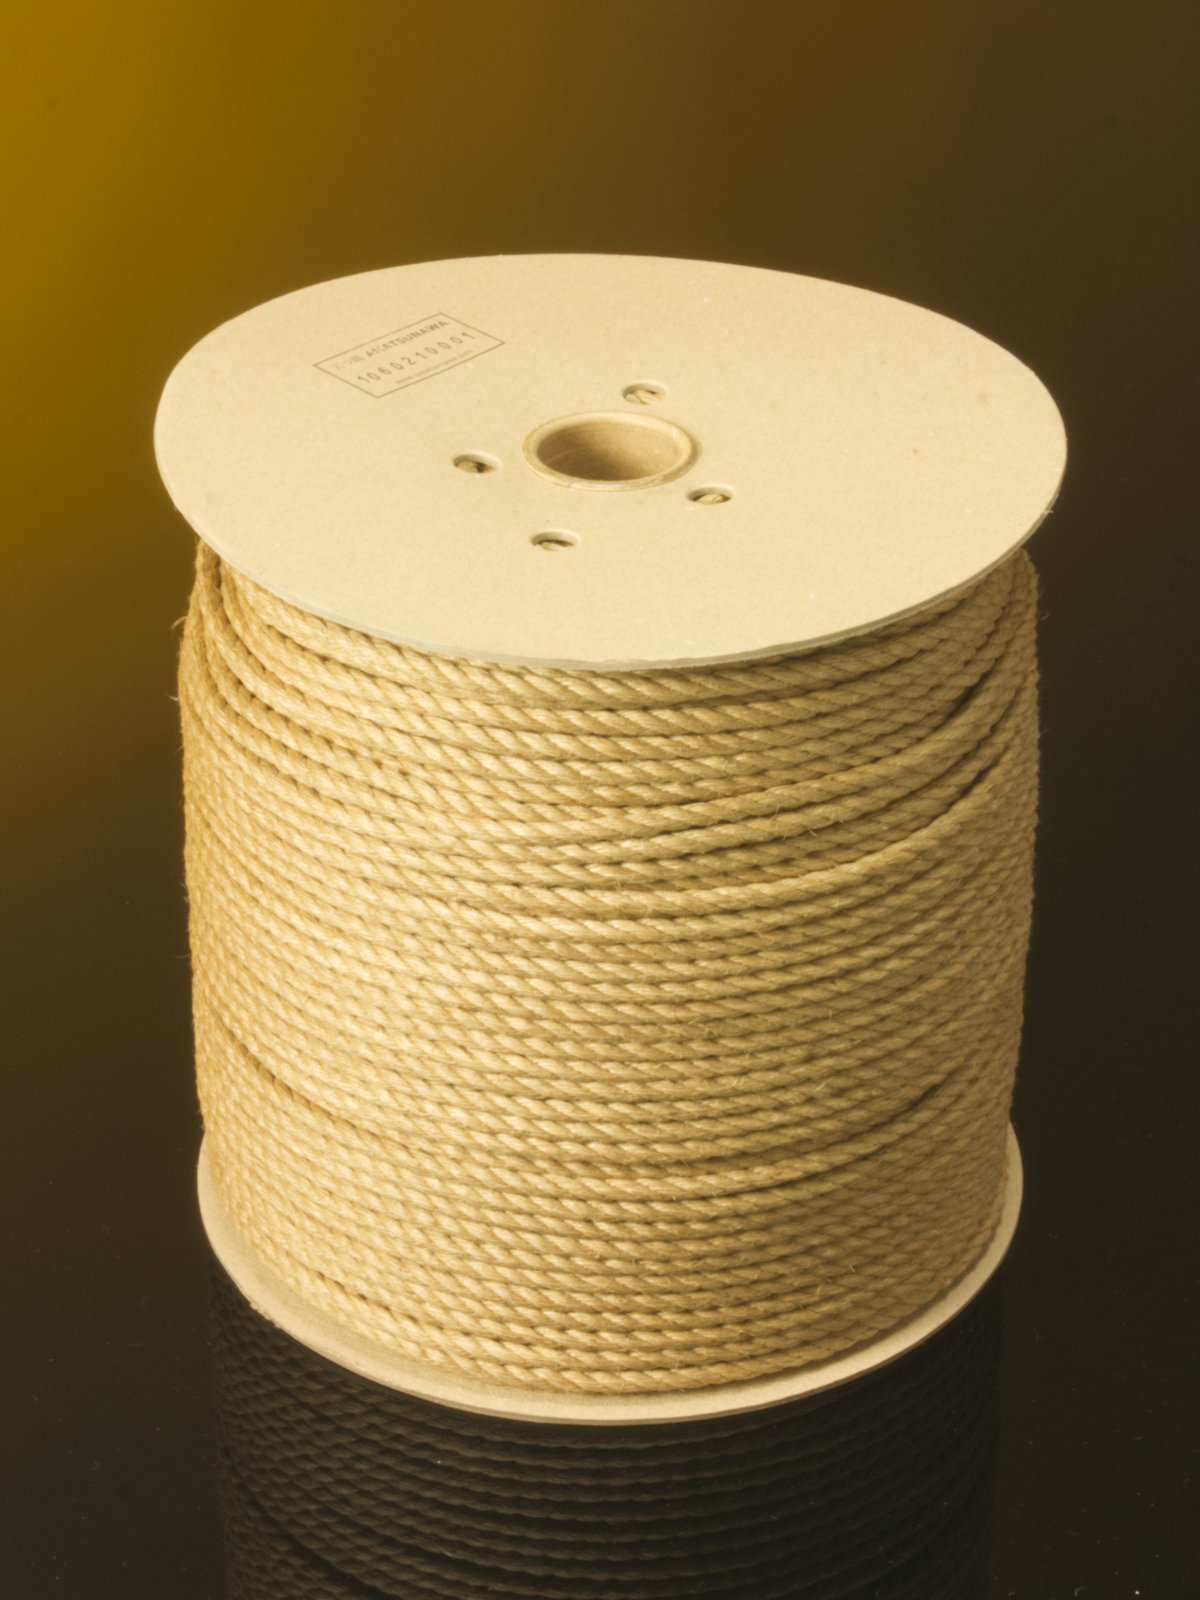 Jouyoku MAXI-ROLL, ~6kg, 300m, ready-for-use Japanese-made jute rope, various diameters, JBO-free, ∅ 6mm 